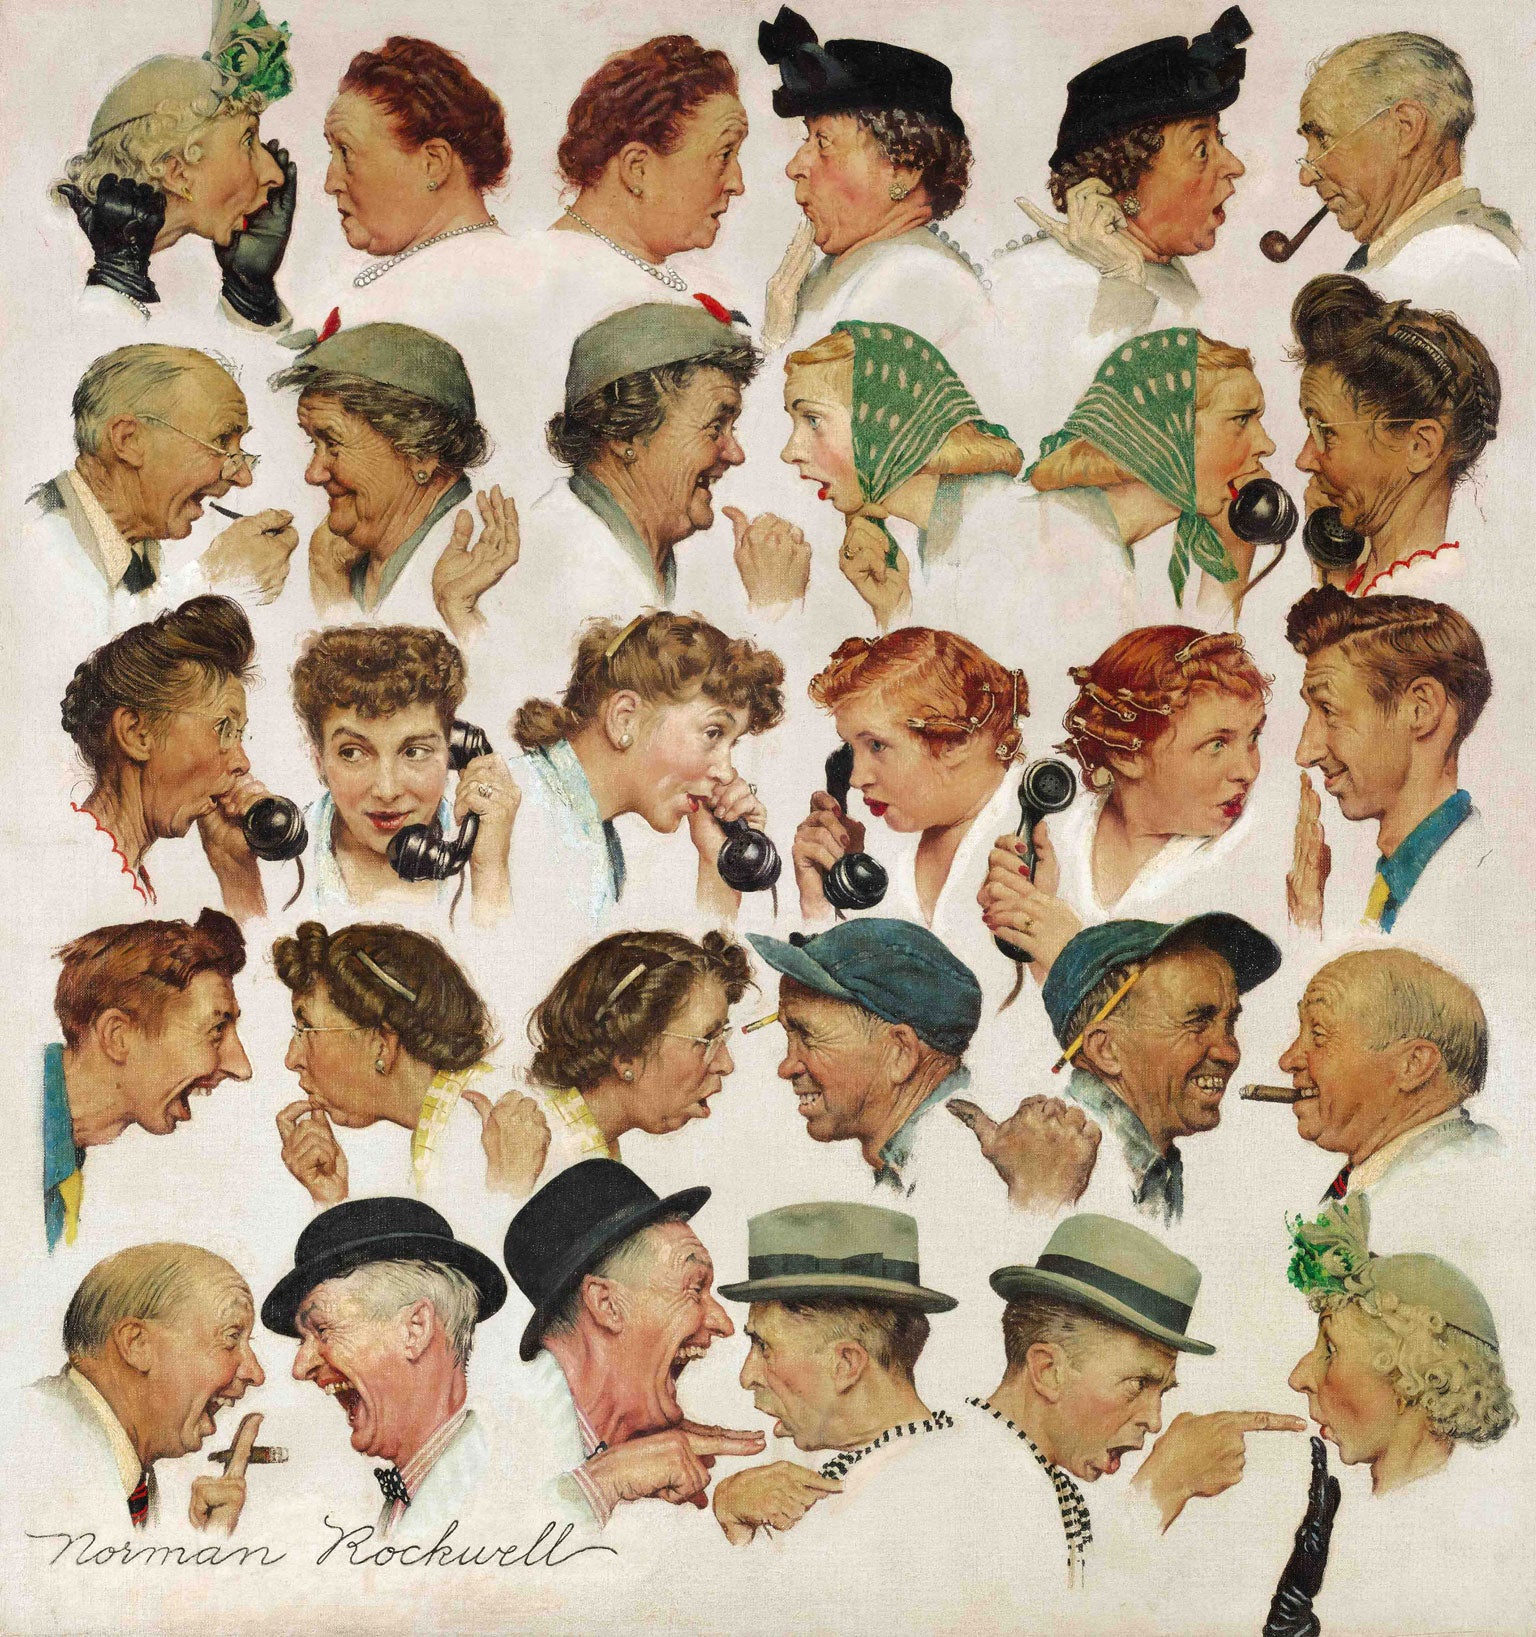 Farewell Rockwells Seven works by Norman Rockwell will go under the